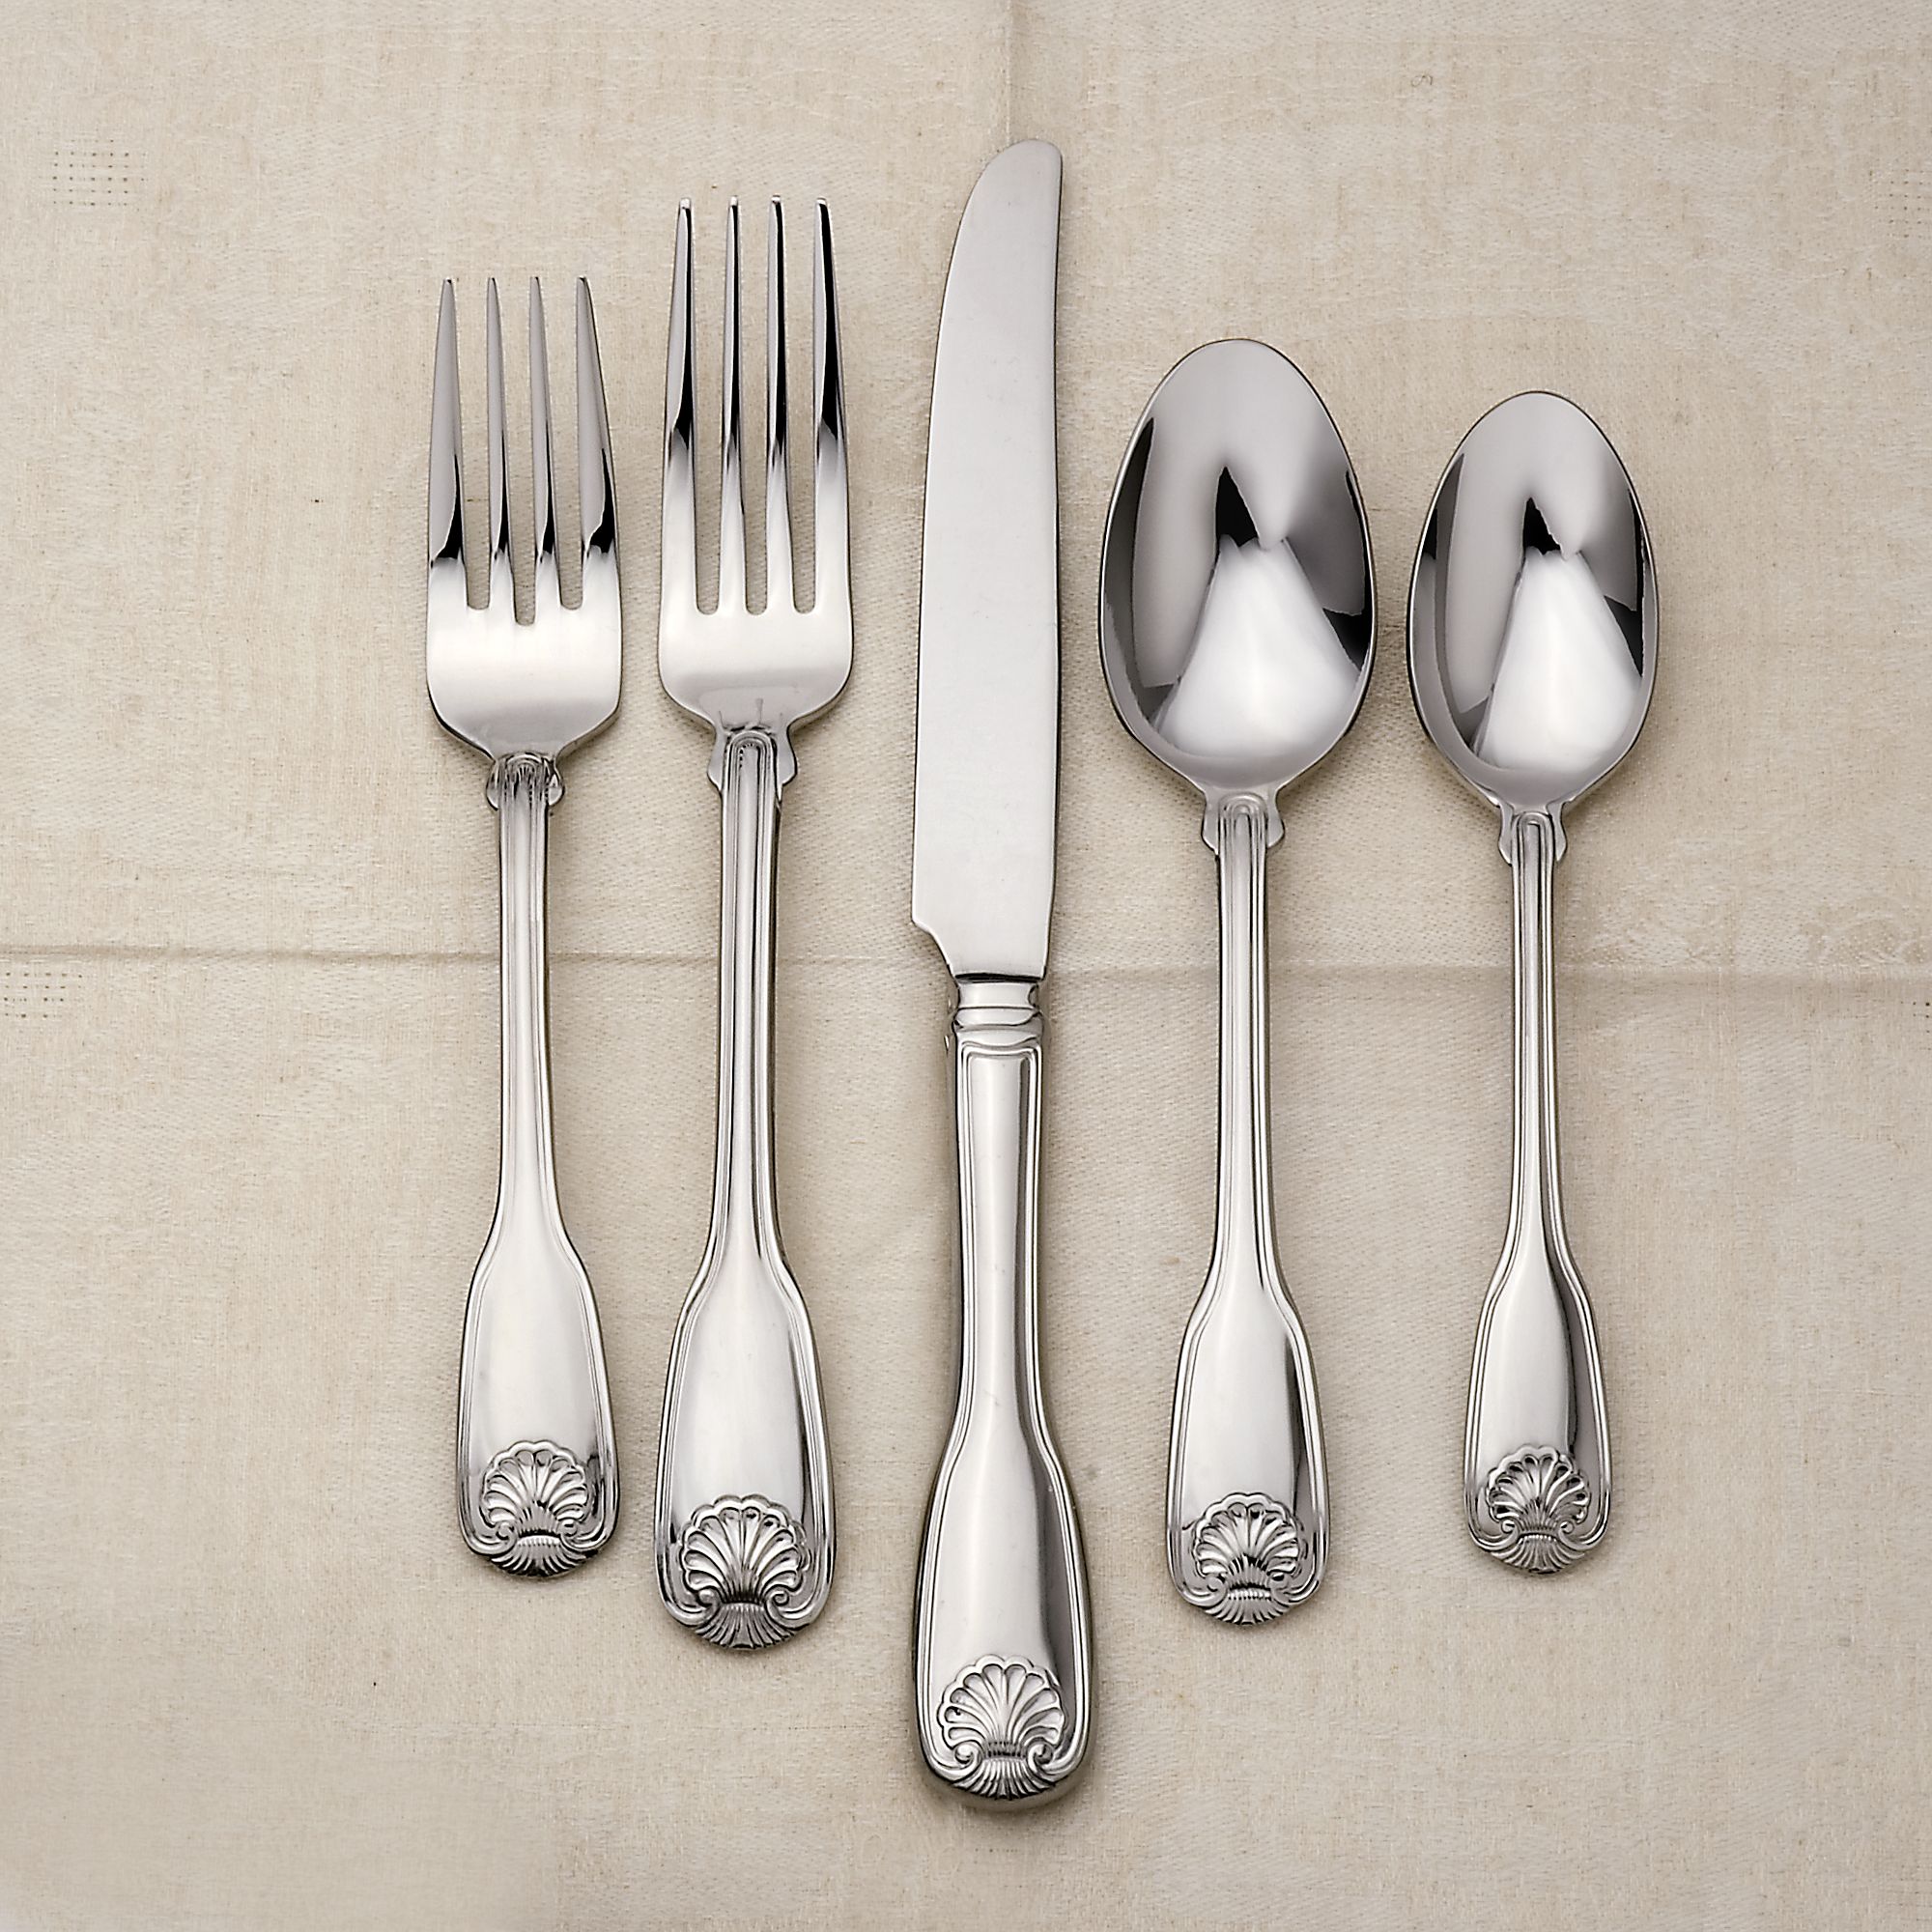 Reed & Barton "Colonial Shell II" 18/10 Stainless Steel Flatware | Ross Reed And Barton Stainless Steel